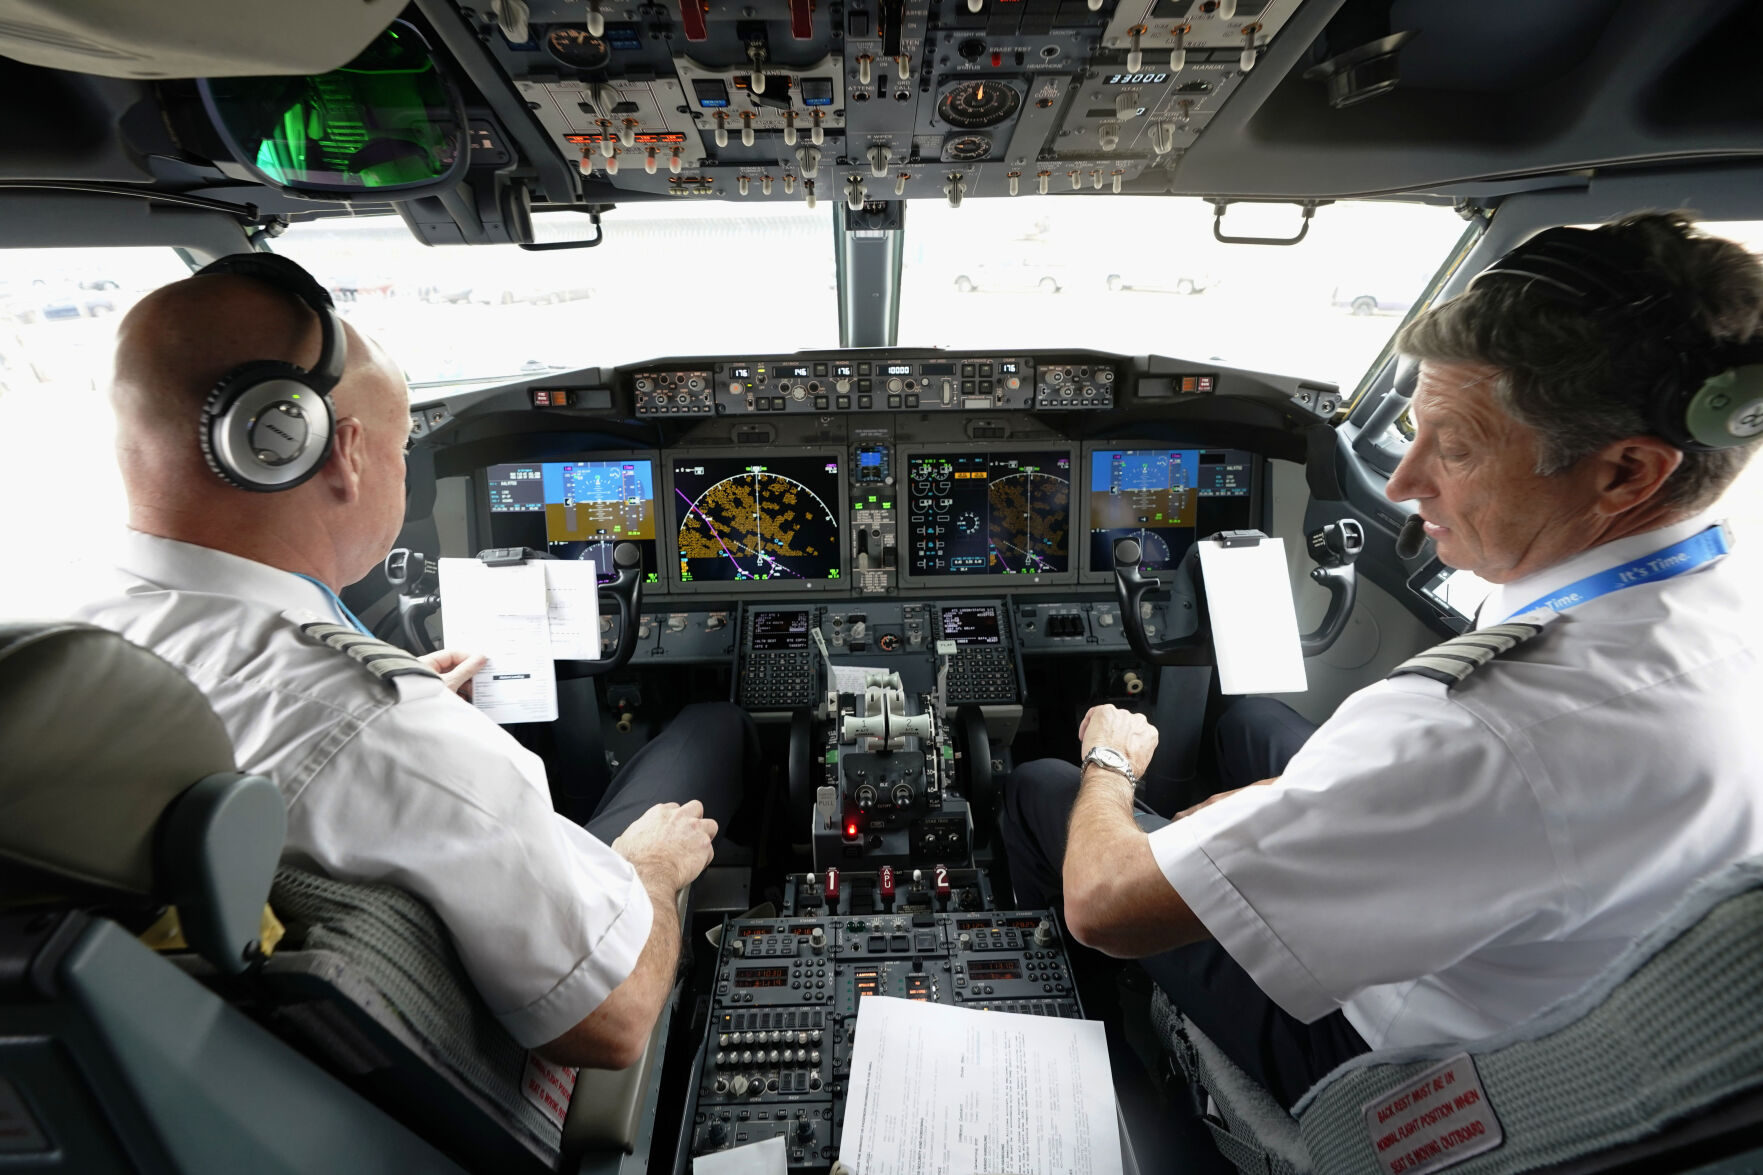 FILE - American Airlines pilot captain Pete Gamble, left, and first officer John Konstanzer conduct a pre-flight check before taking off from Dallas Fort Worth airport on Dec. 2, 2020, in Grapevine, Texas. The Federal Aviation Administration is warning against raising the mandatory retirement age for airline pilots. The FAA says it needs to study the safety implications before raising the age. FAA Administrator Mike Whitaker told key senators about the agency